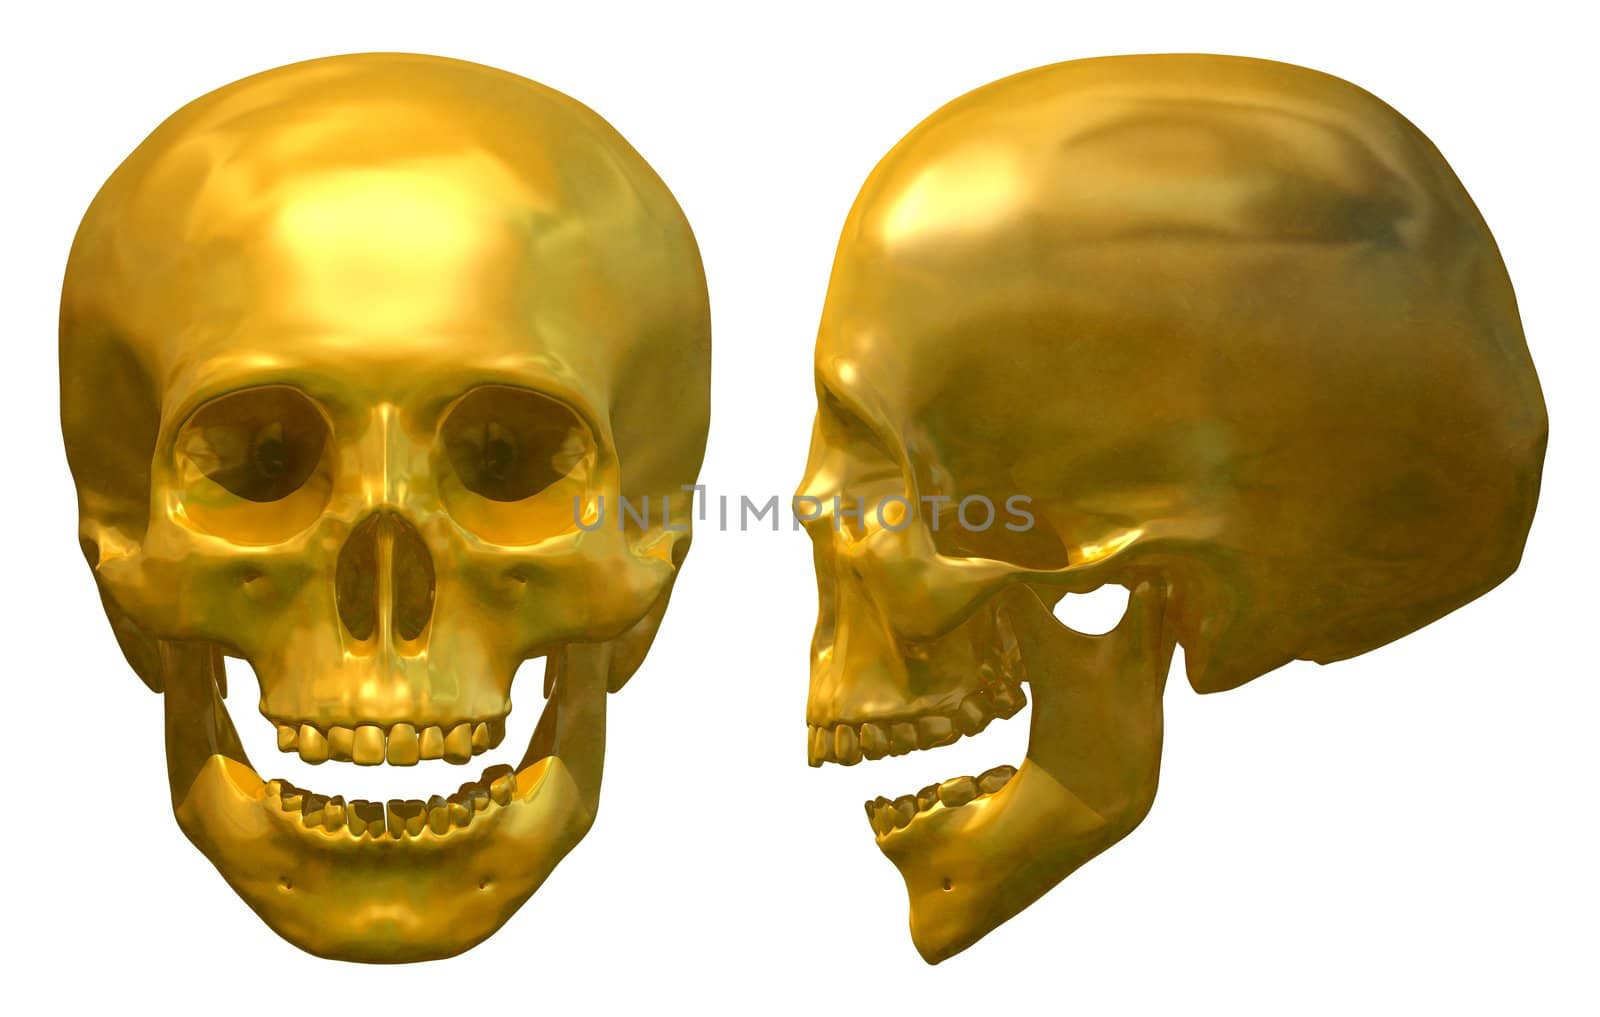 Illustration of a Golden Skull front and side views